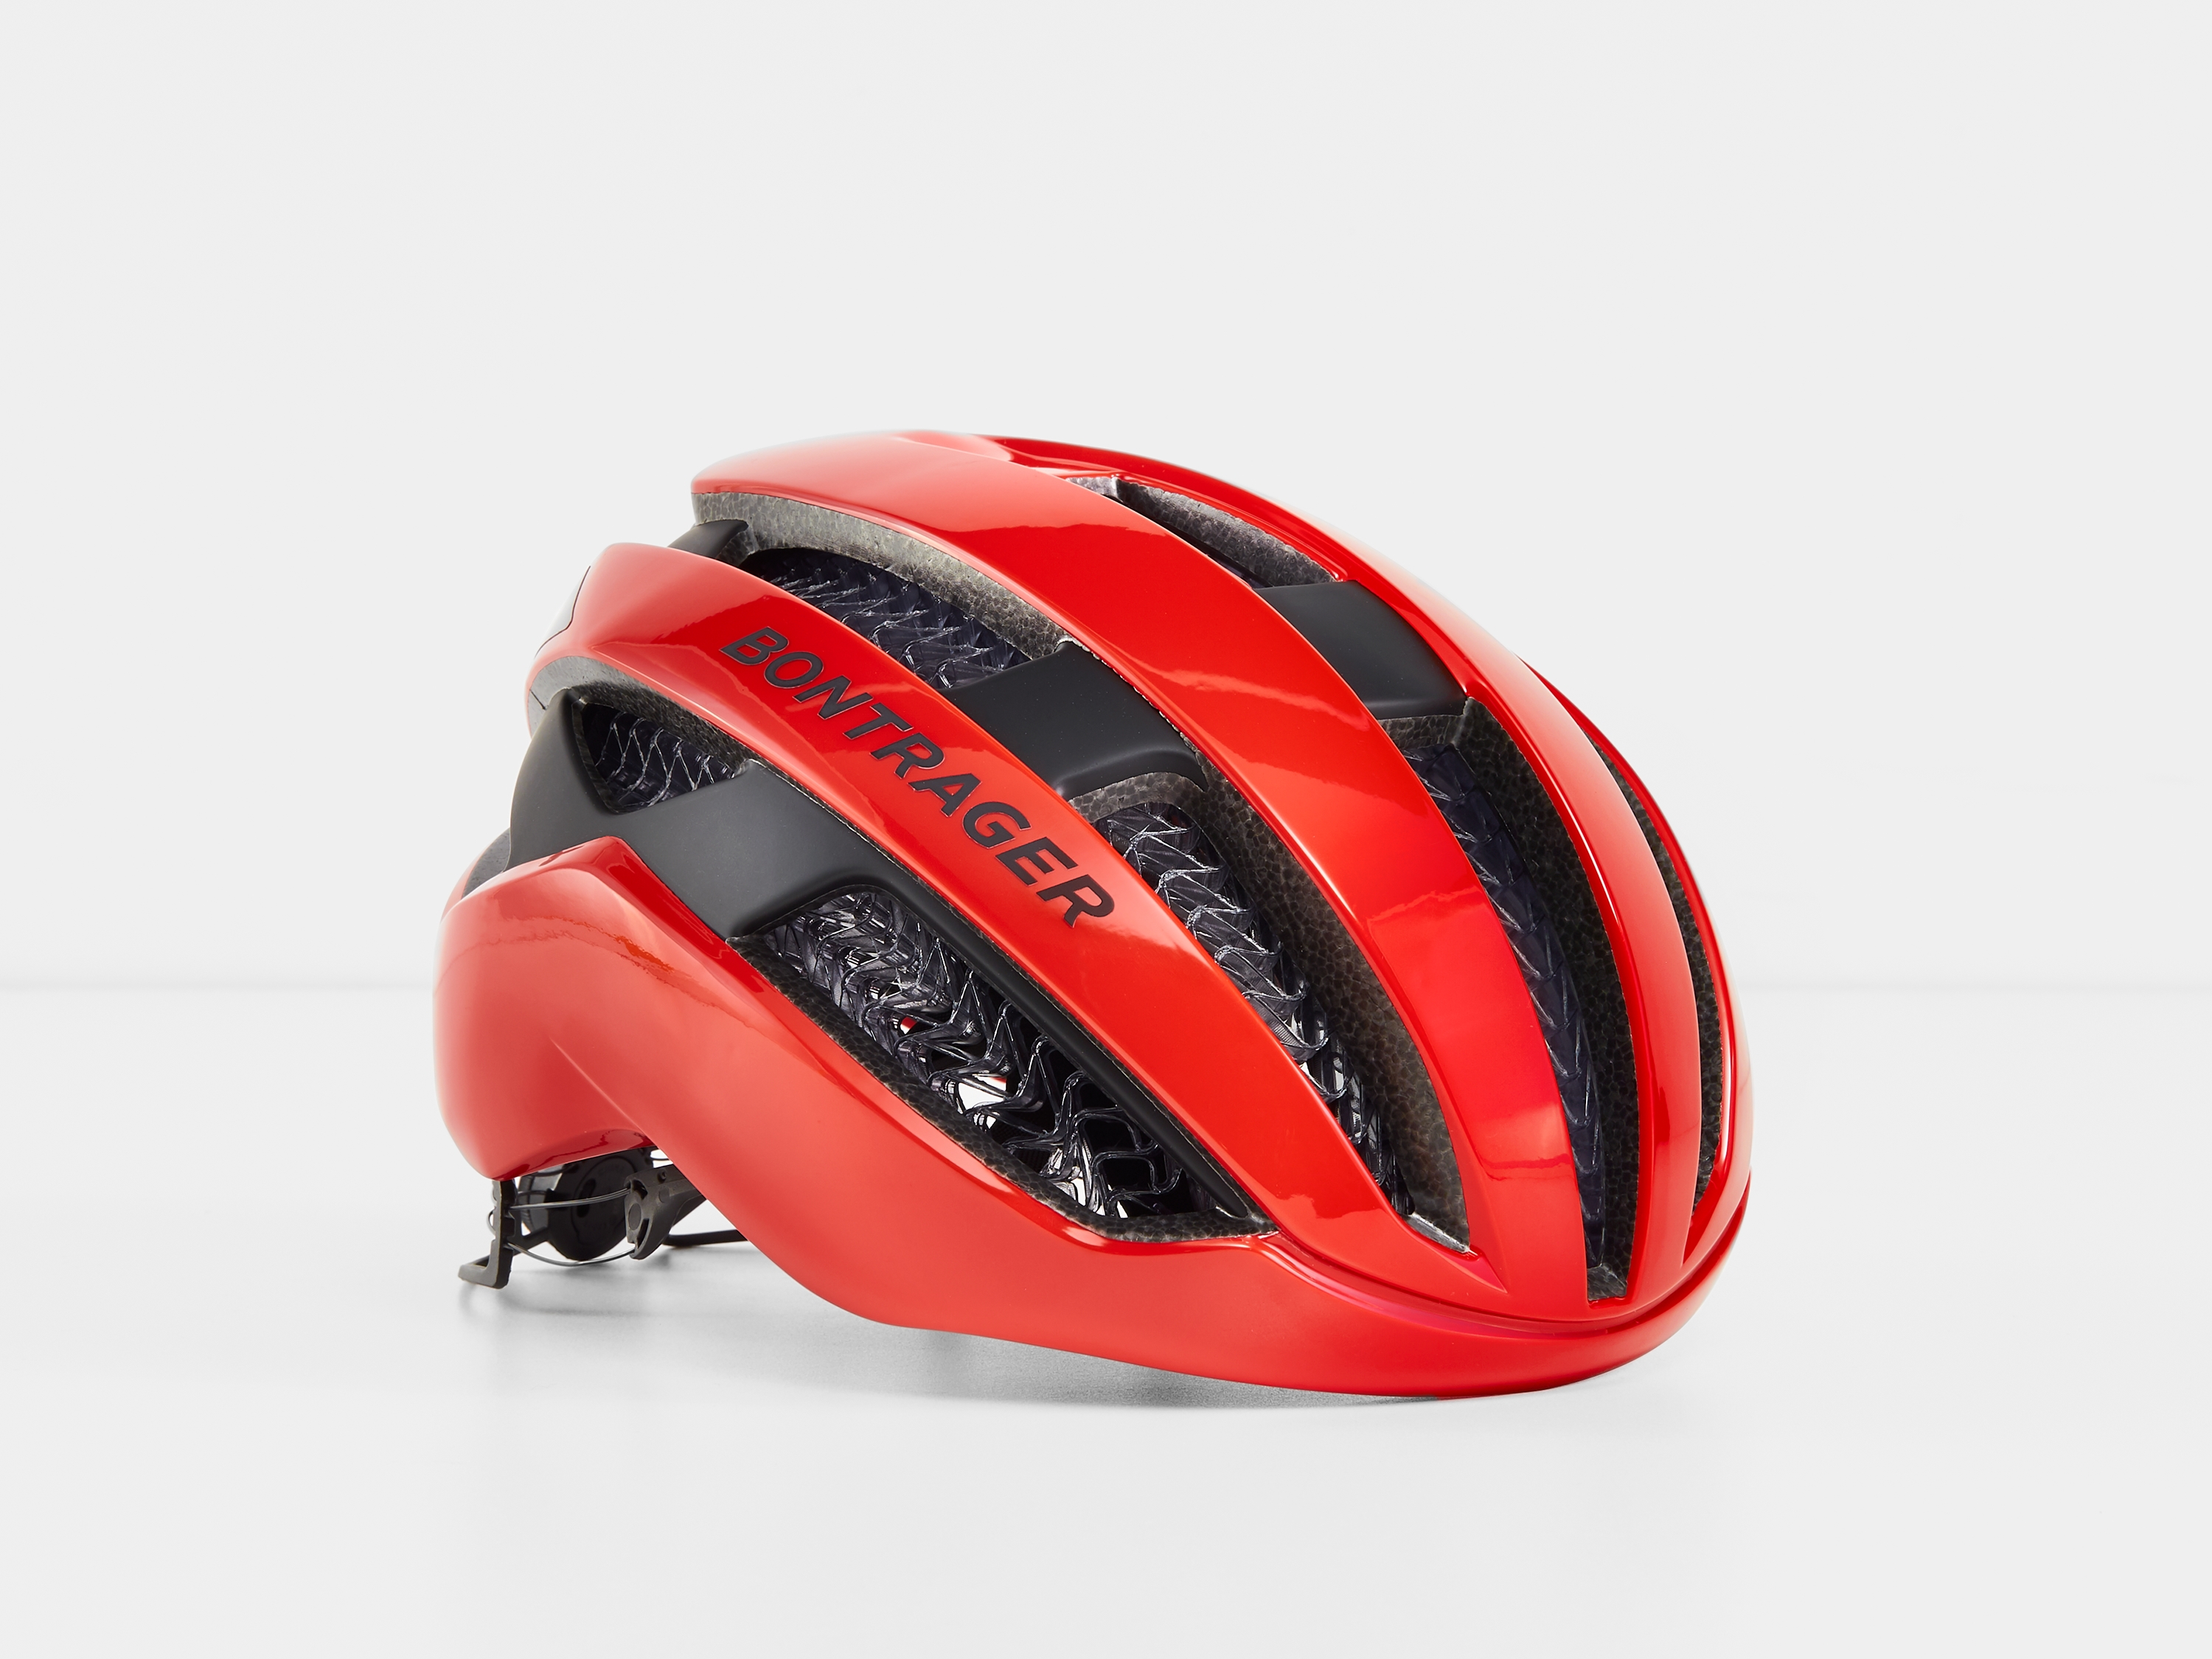 <a href="https://cycles-clement.be/product/casque-bont-circuit-wavece-s-rouge/">CASQUE BONT CIRCUIT WAVECE  S ROUGE</a>